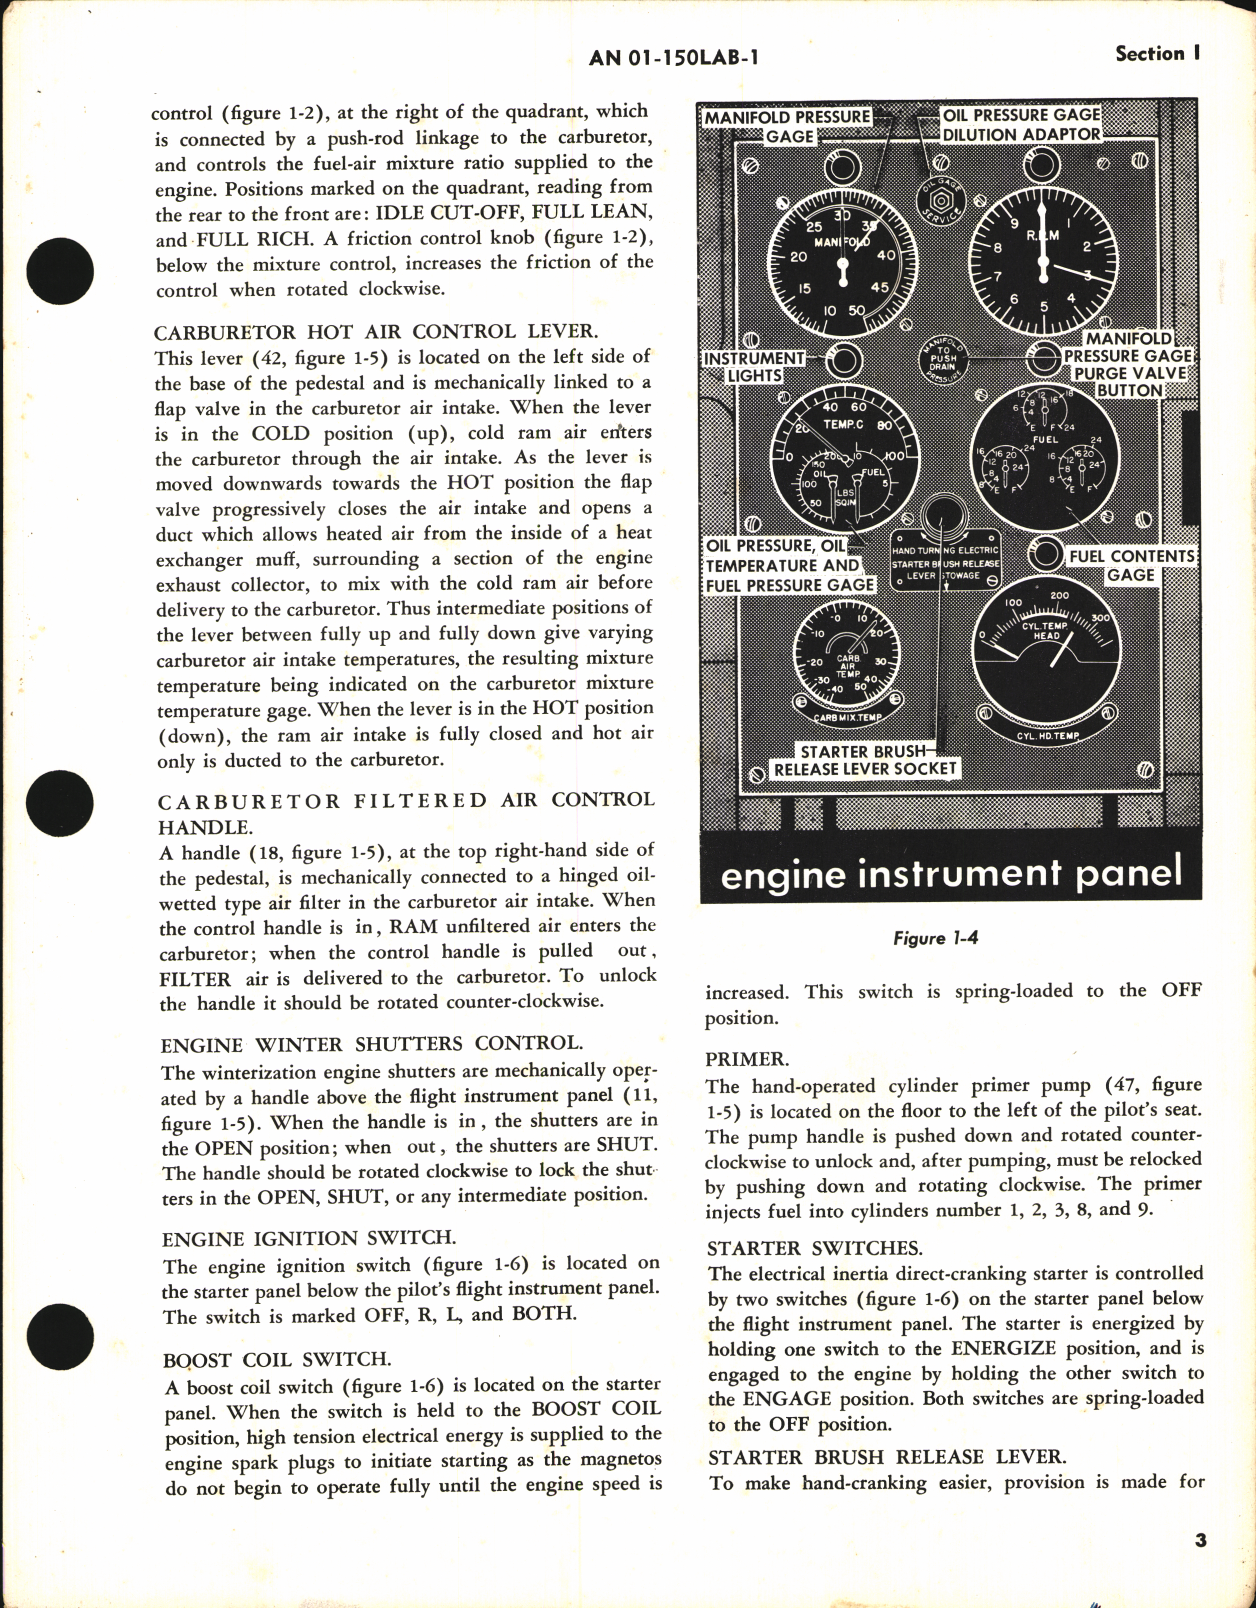 Sample page 7 from AirCorps Library document: Flight Handbook for L-20A